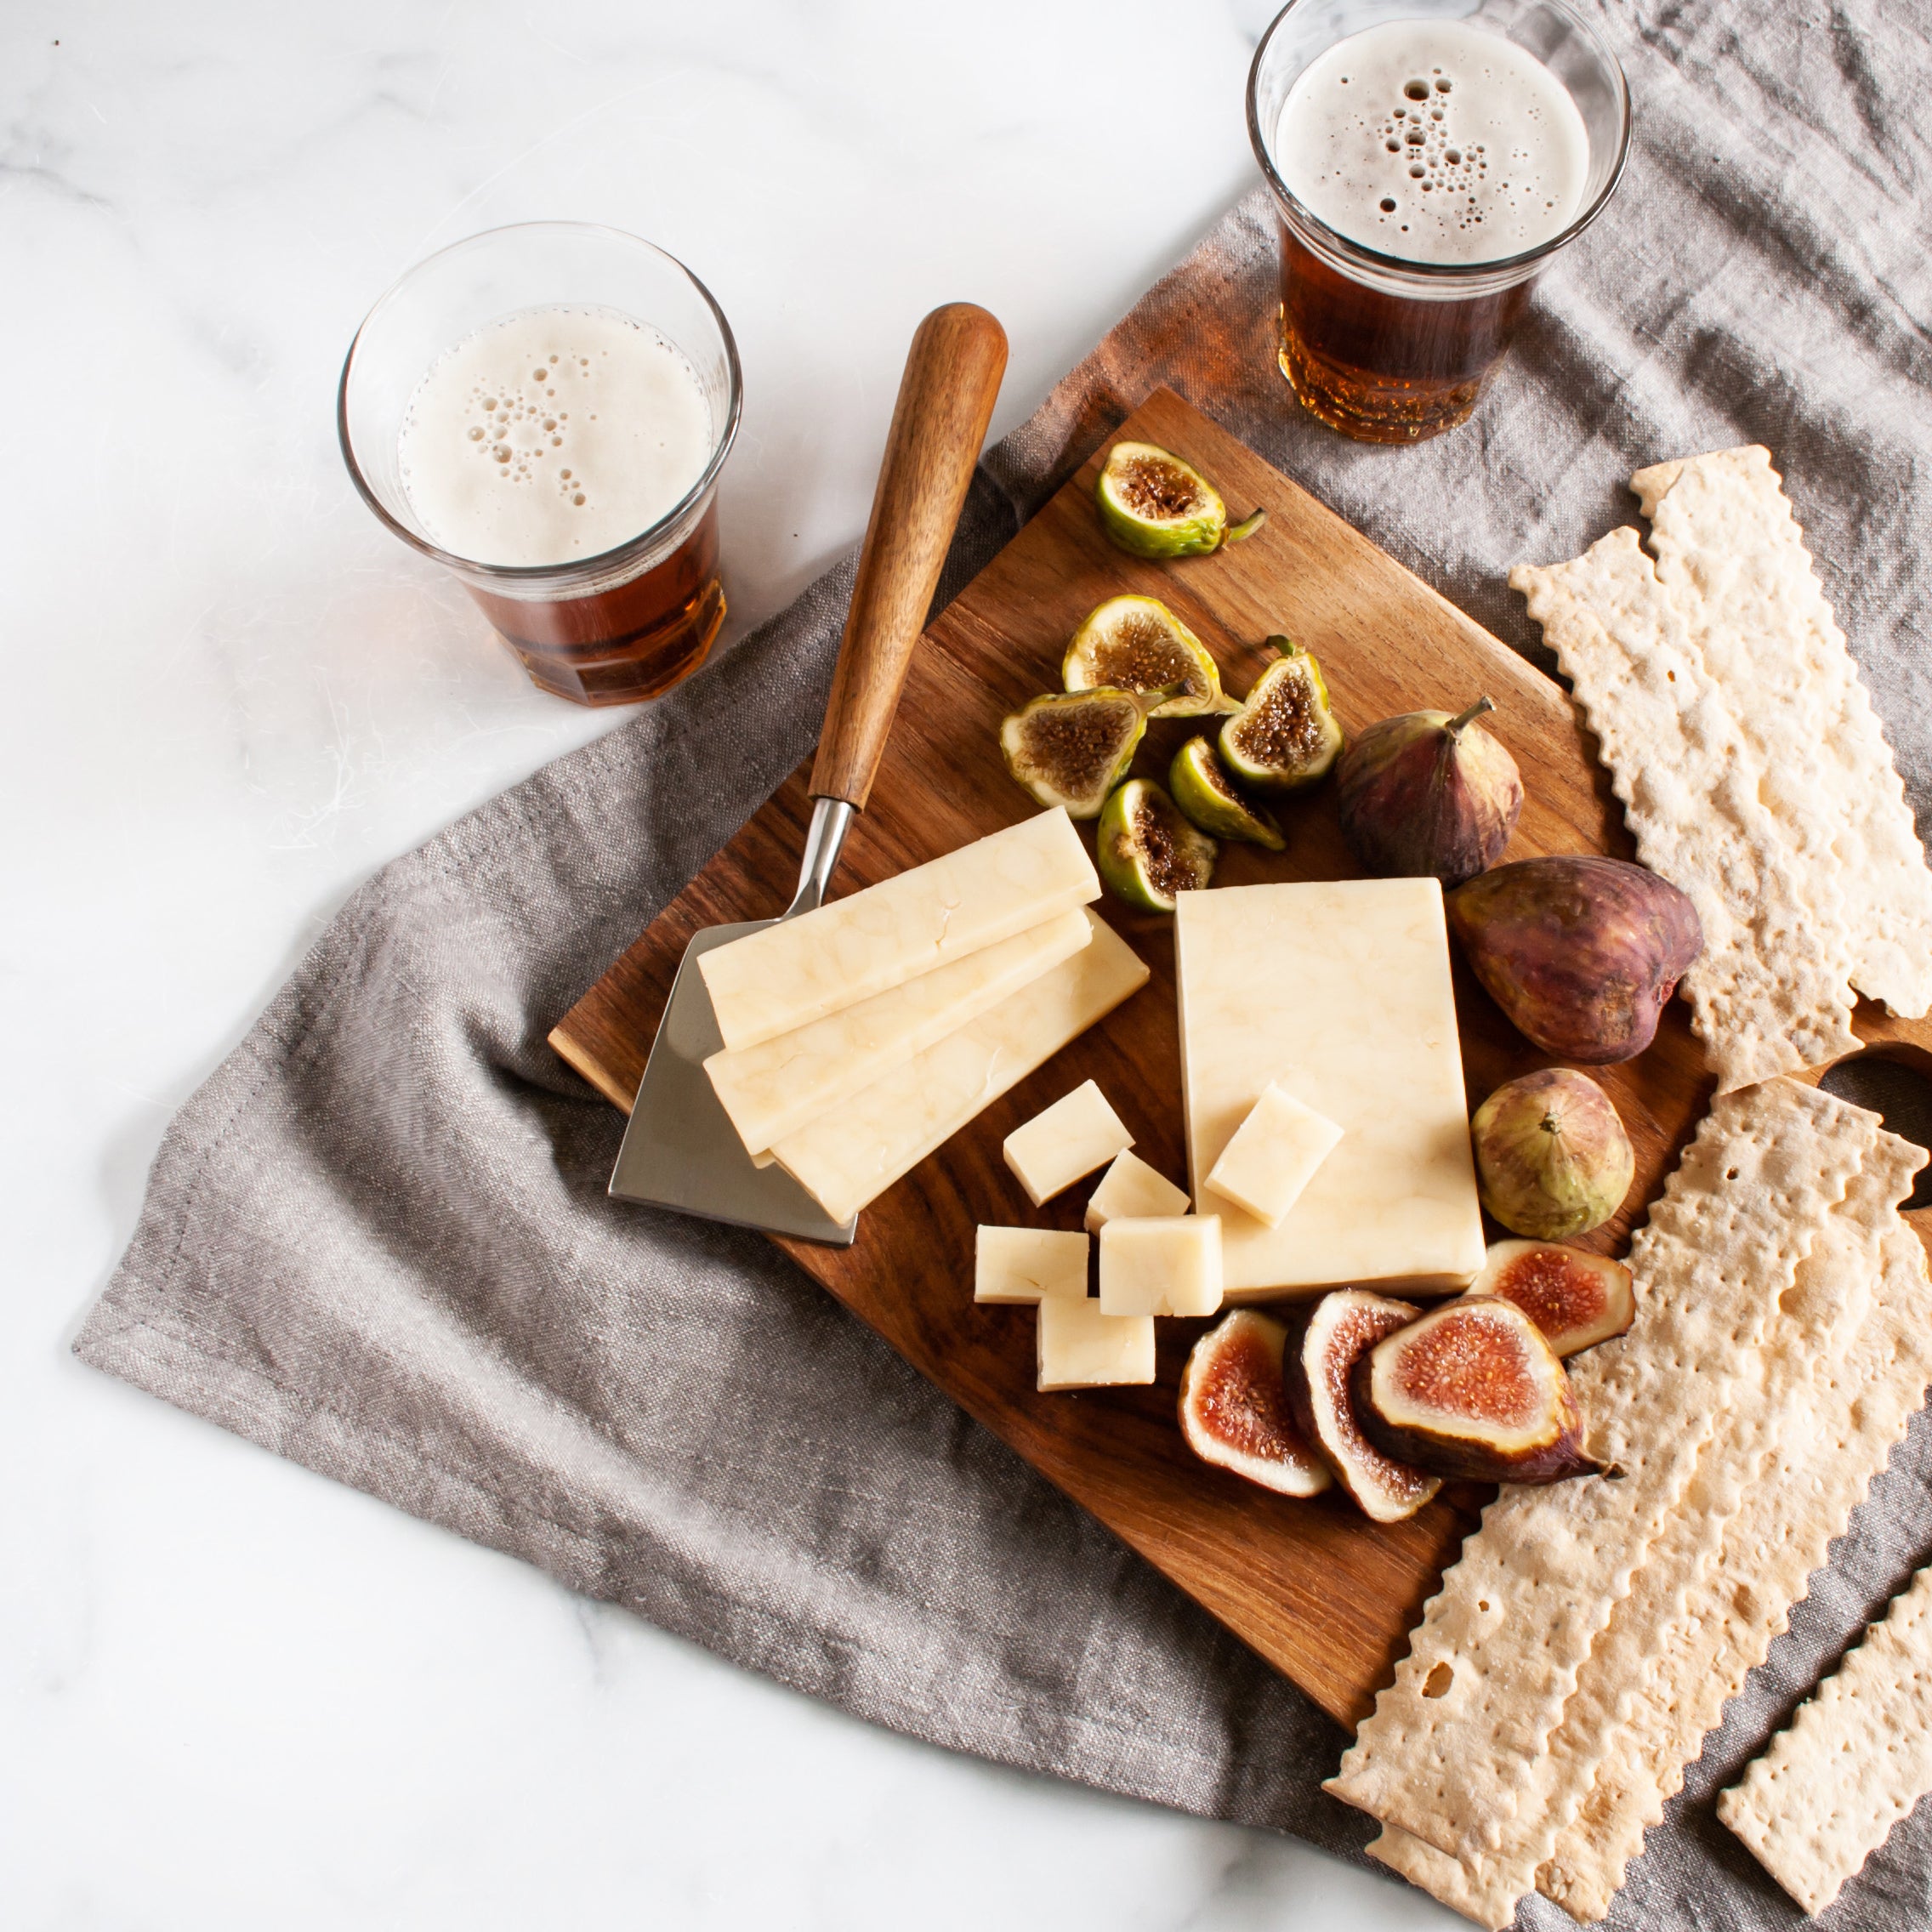 Craft Beer Cheddar Cheese_Fiscalini_Cheese